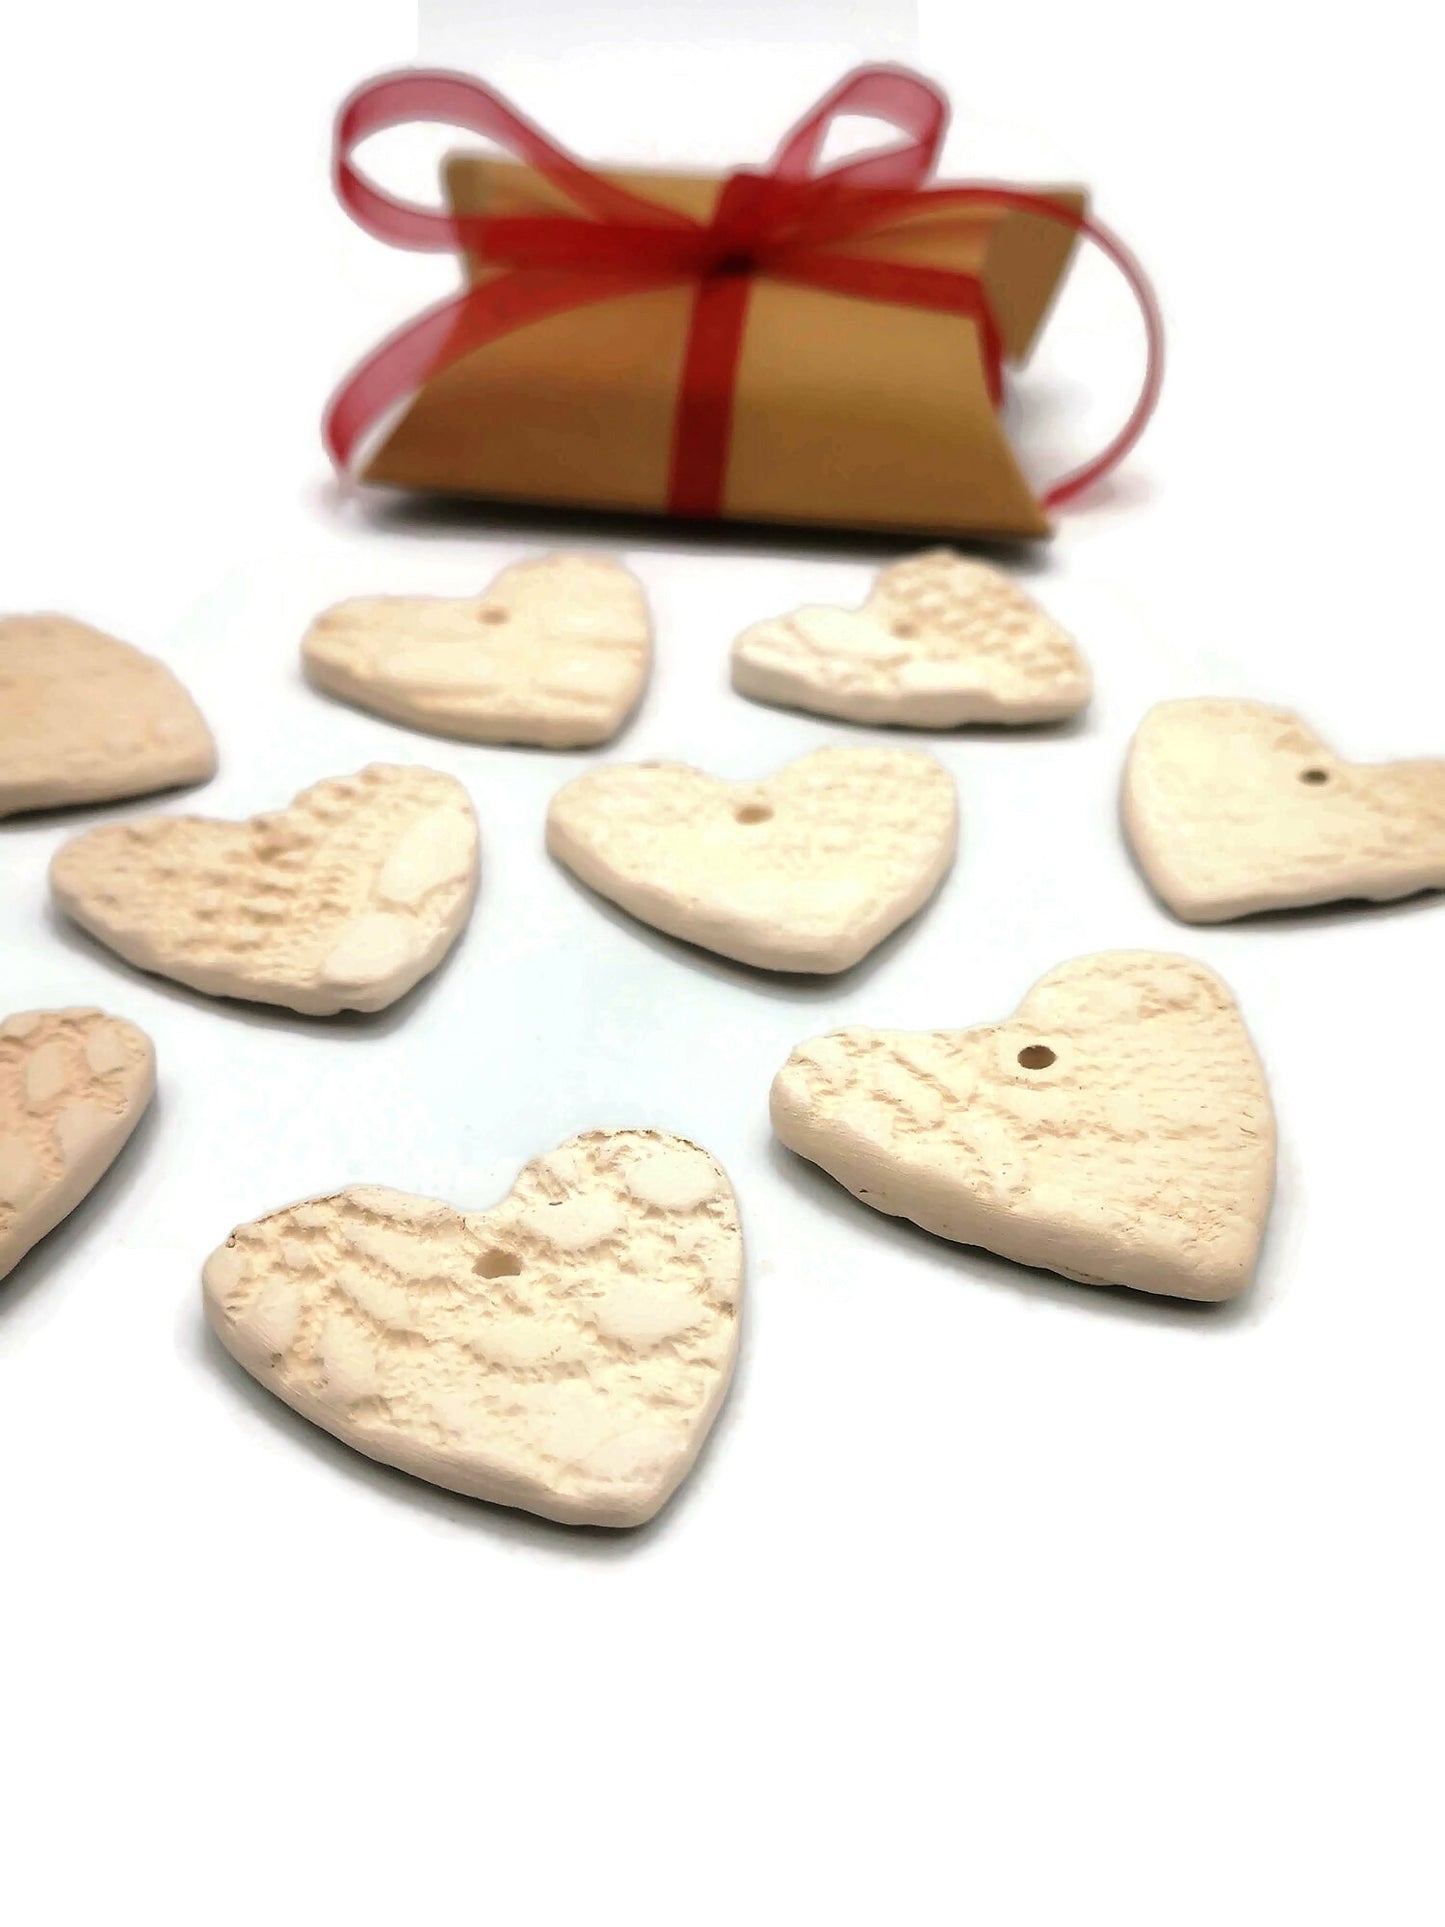 PORTUGUESE WEDDING FAVORS For Guests, Heart Gift Tags, Cute Wedding Favors, Reusable Gift Tag, Ceramic Bisque, Shabby Chic Gift Tag - Ceramica Ana Rafael